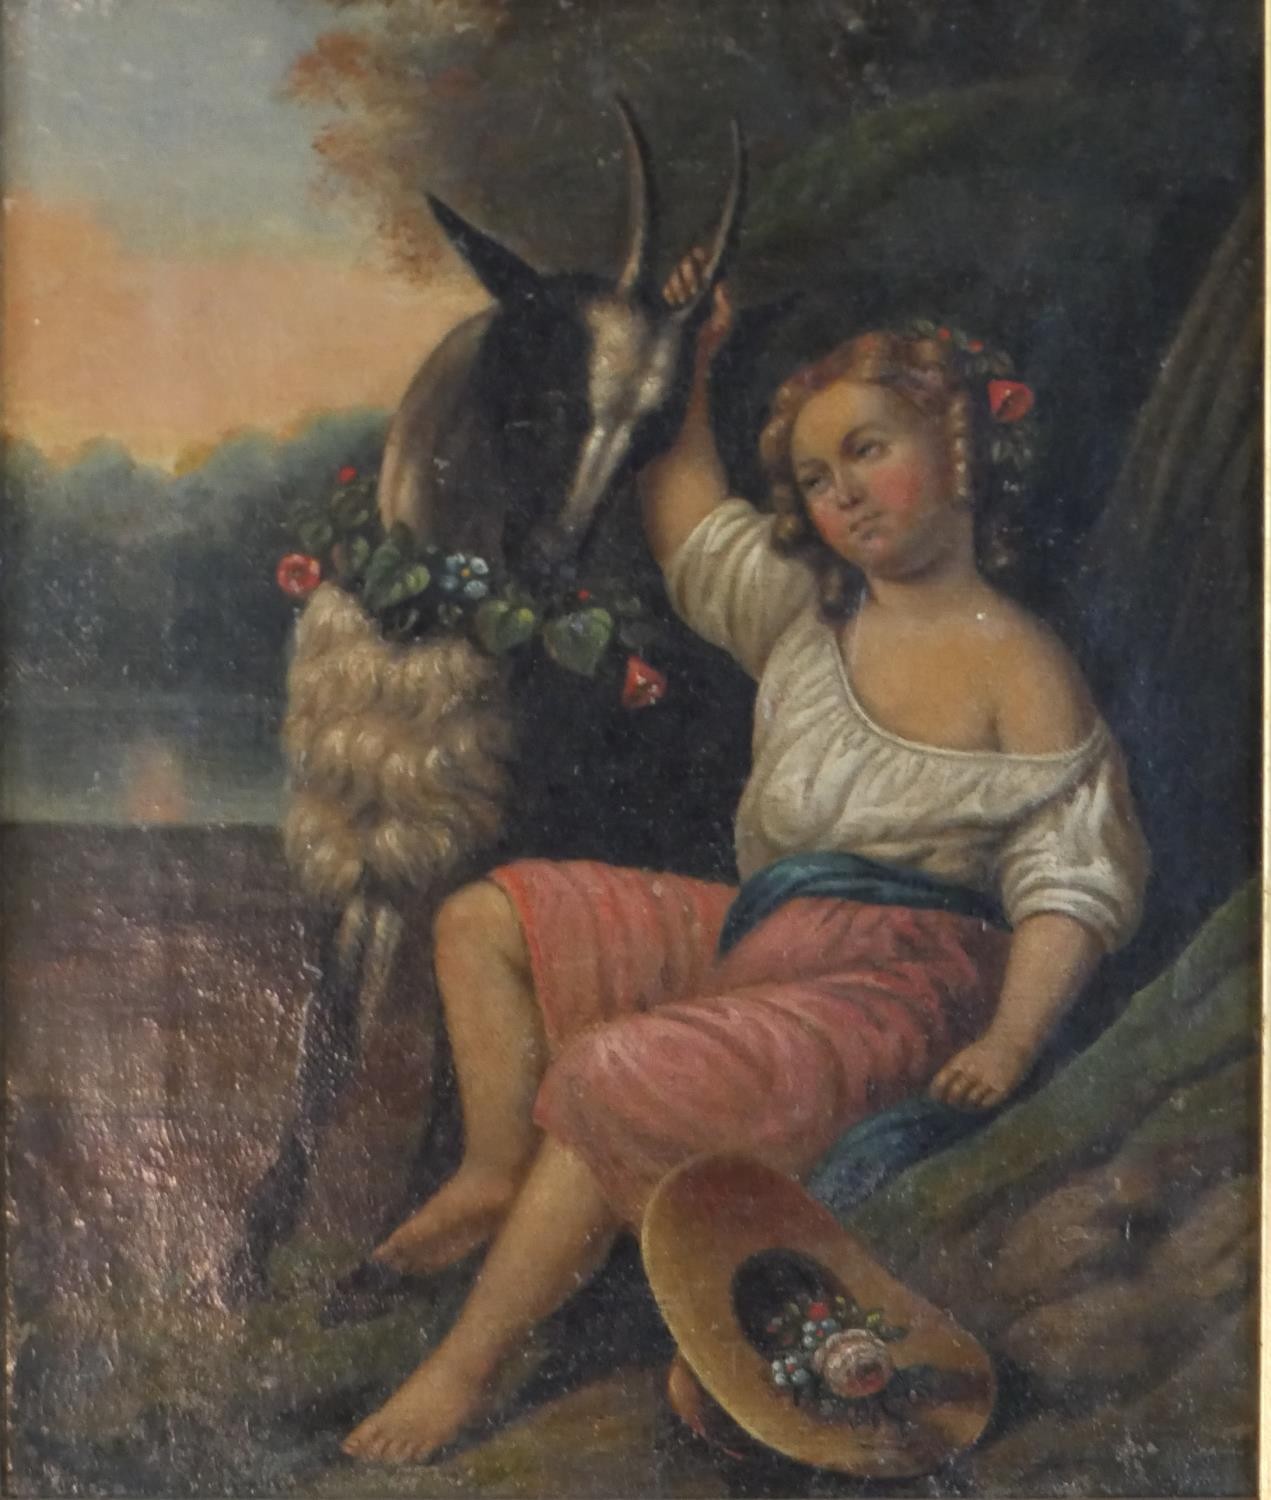 A gilt framed 19th century oil on canvas of a young child with a goat, unsigned. H.39 W.35.5cm